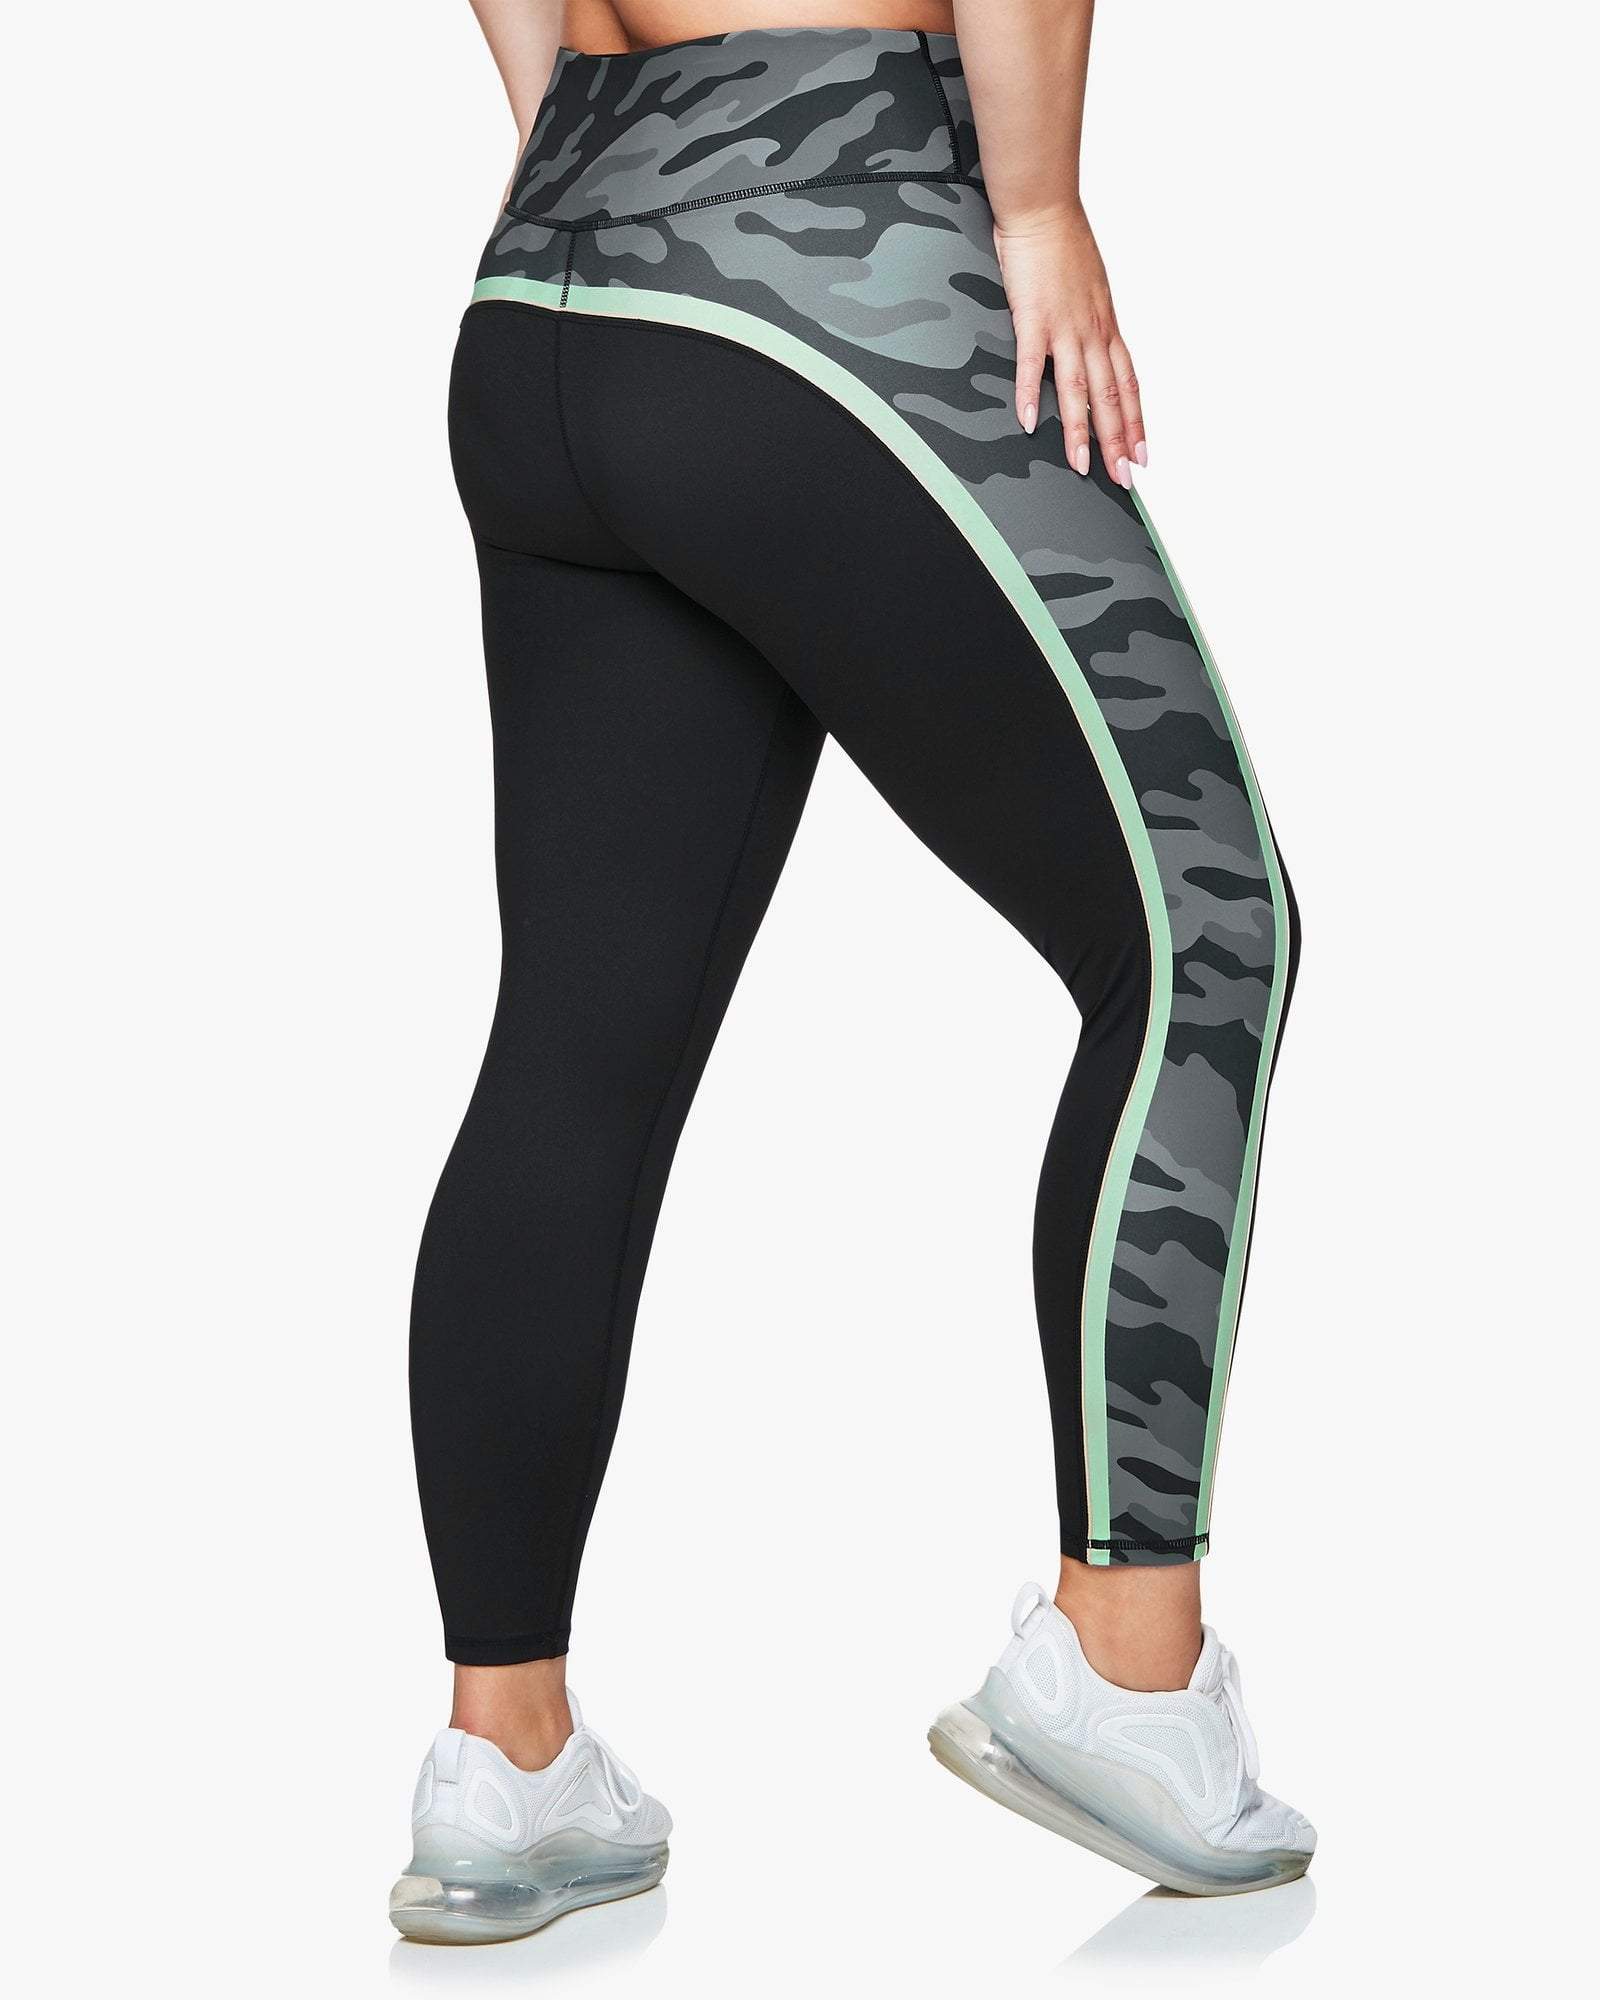 Best Leggings For Squatting  International Society of Precision Agriculture